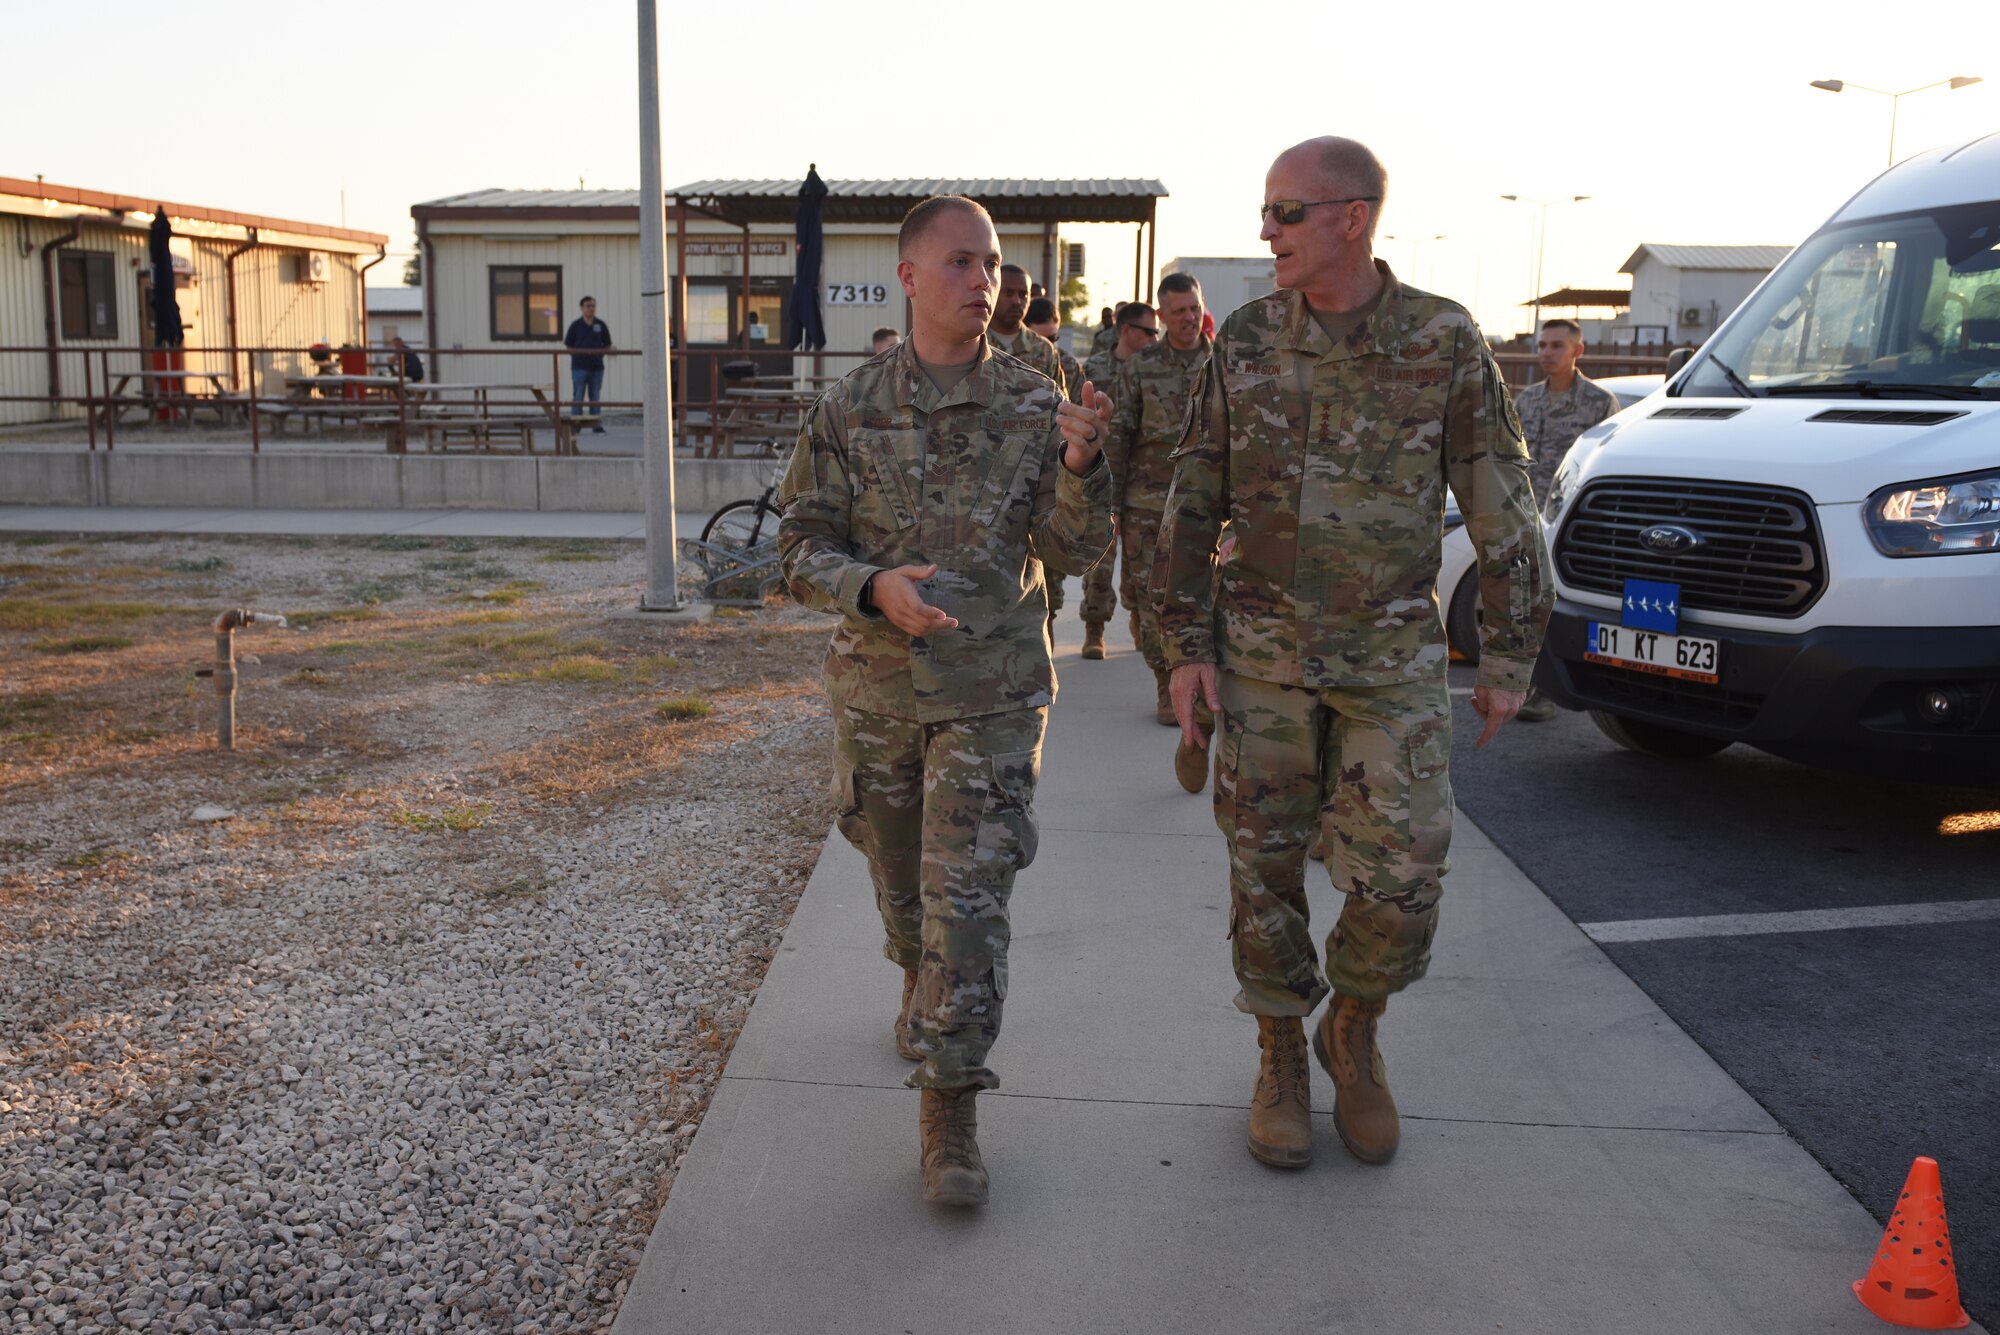 U.S. Air Force Vice Chief of Staff Stephen W. Wilson receives a briefing from a deployed Airman at Incirlik Air Base, Turkey, Sept. 29, 2019. Wilson visited various facilities around the installation in order to observe the state of morale, readiness and wellness of the Airmen at Incirlik. (U.S. Air Force photo by Staff Sgt. Joshua Magbanua)